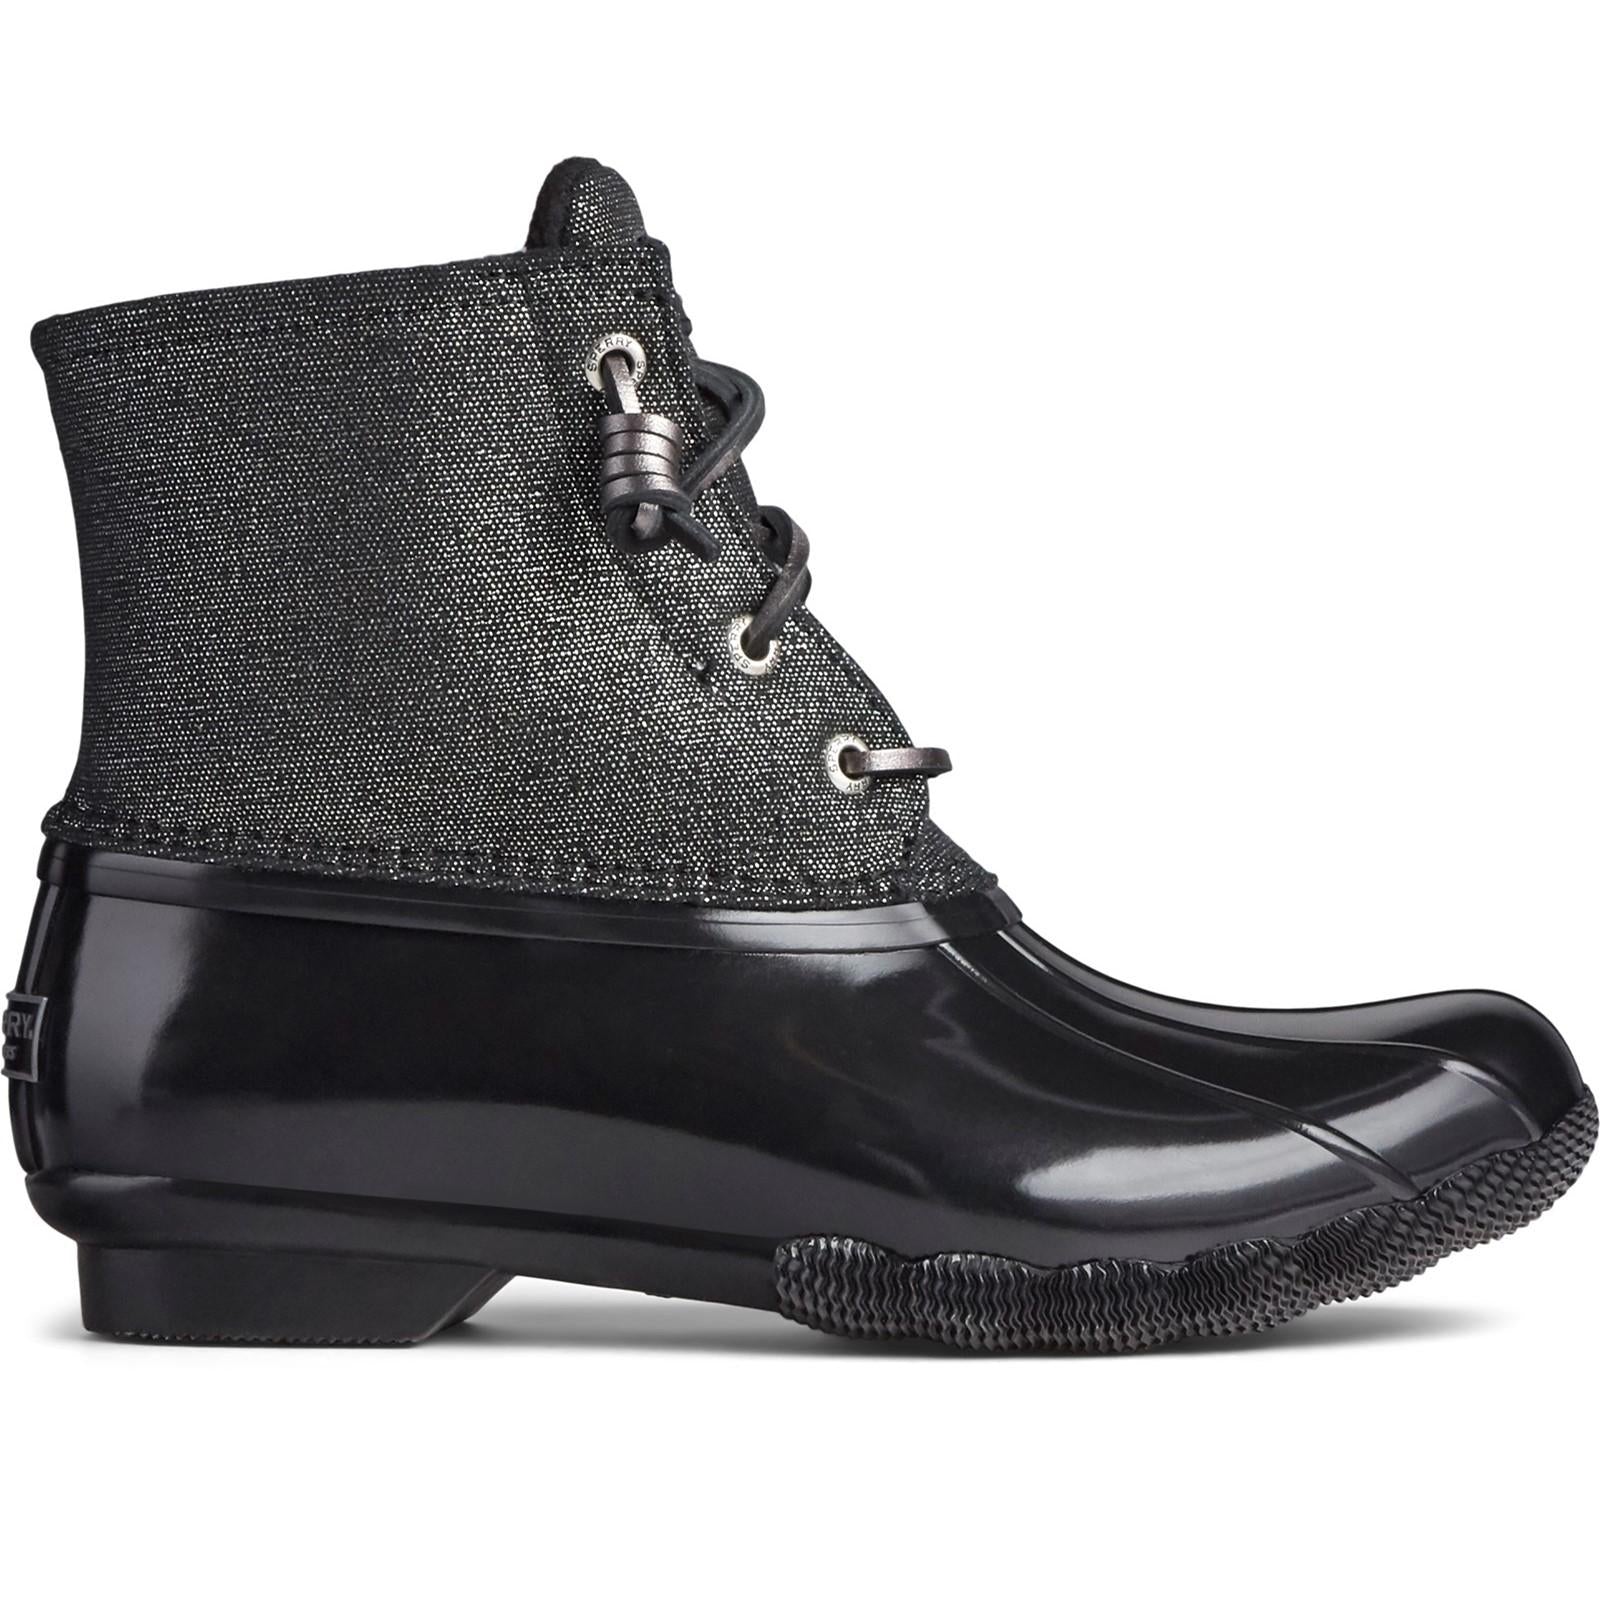 Sperry Saltwater Sparkle Duck Weather Boot